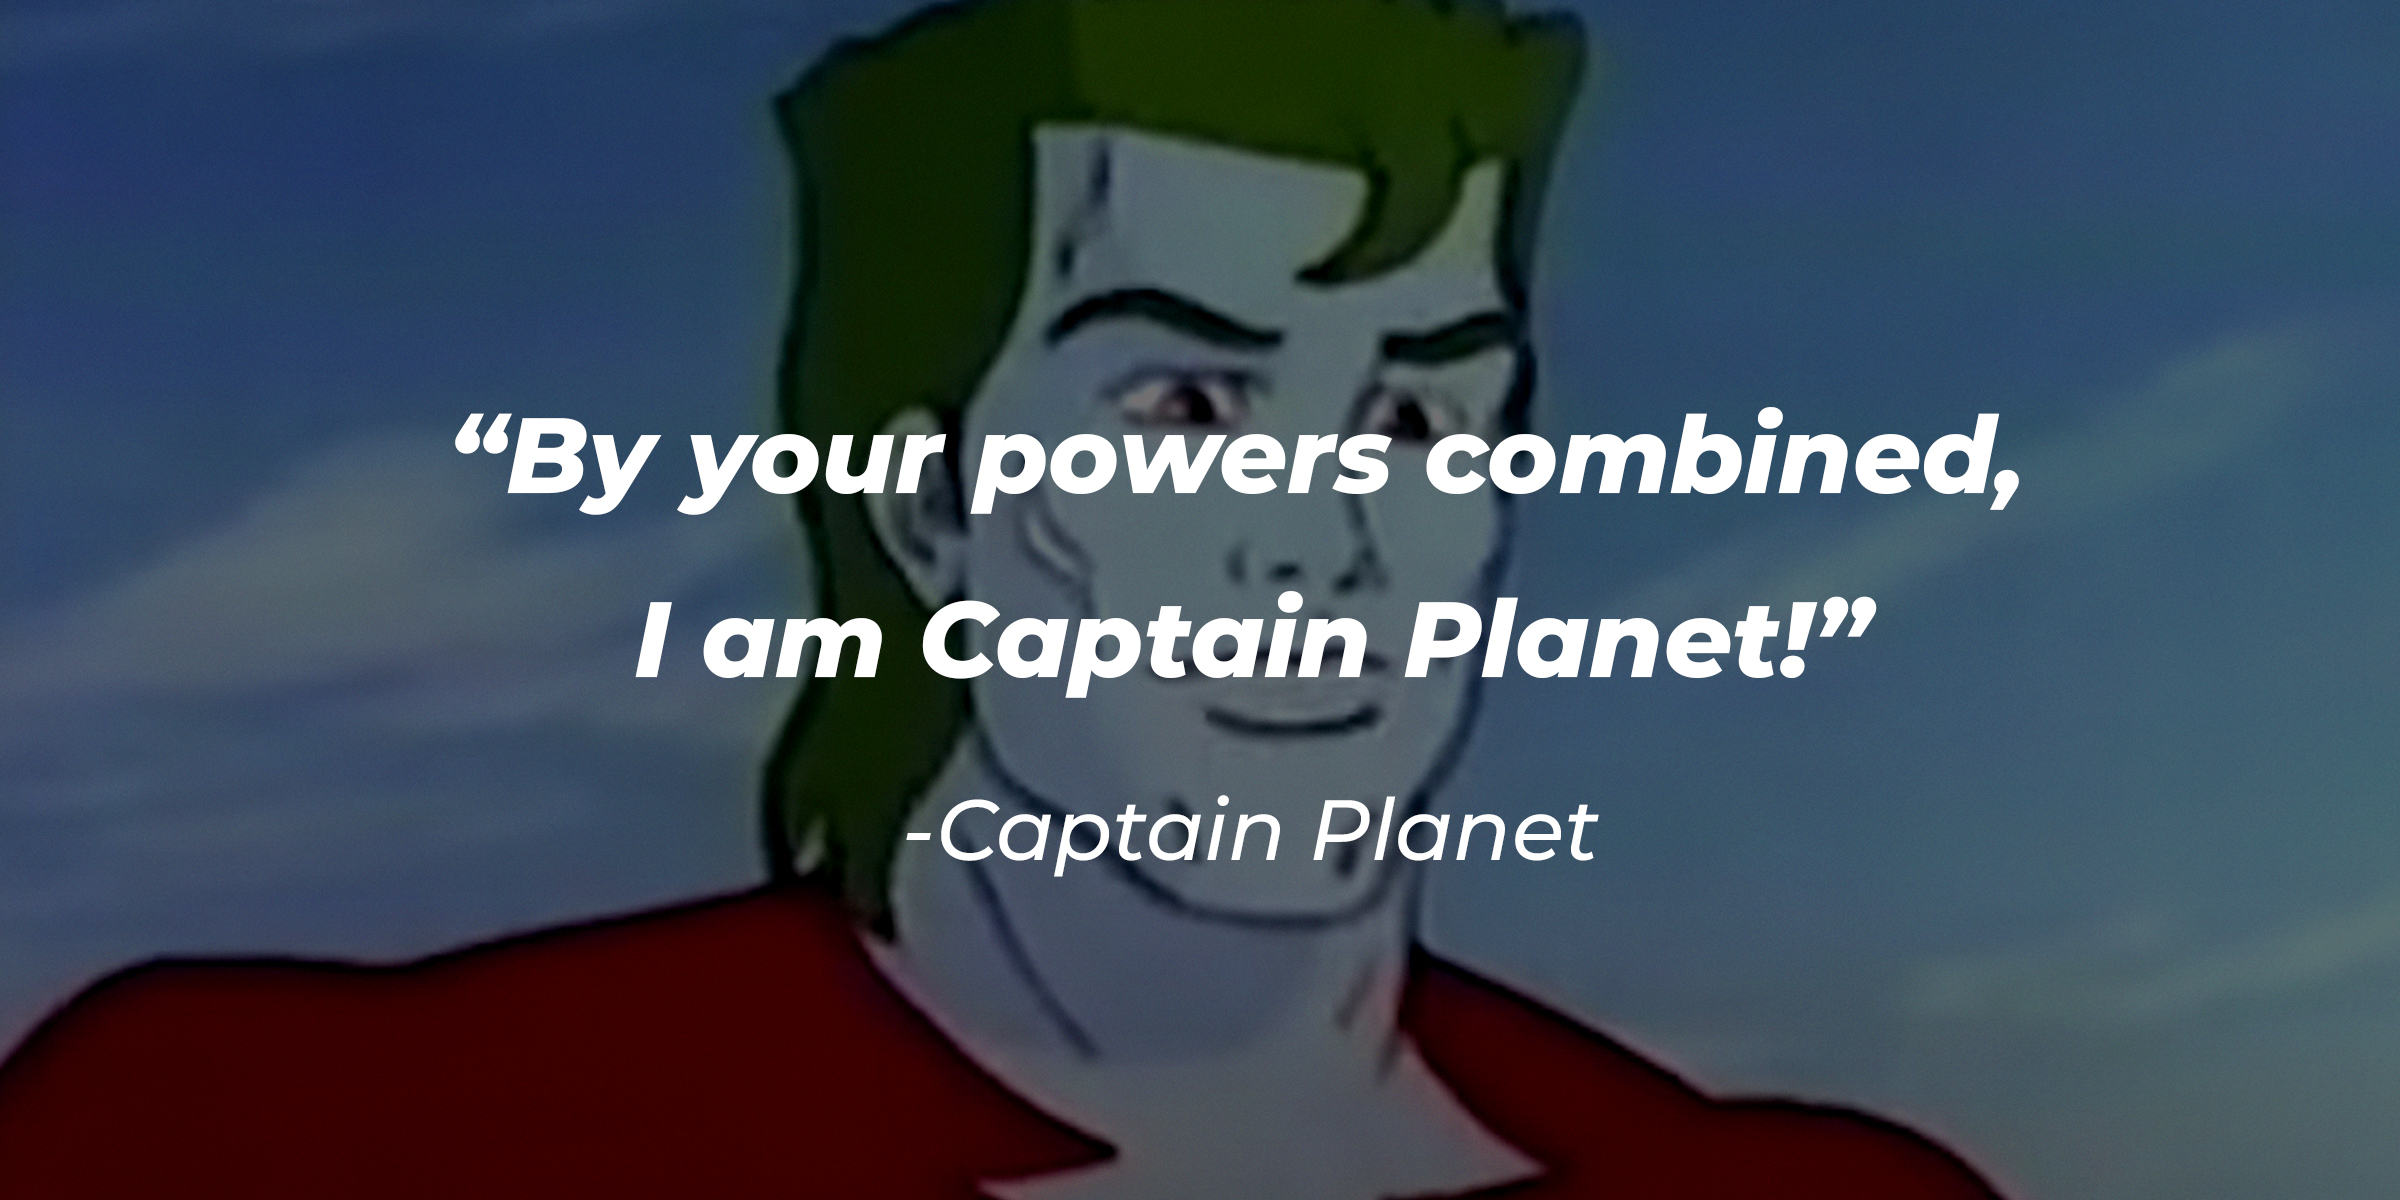 Captain Planet's quote: “By your powers combined, I am Captain Planet!” | Source: facebook.com/CaptainPlanet